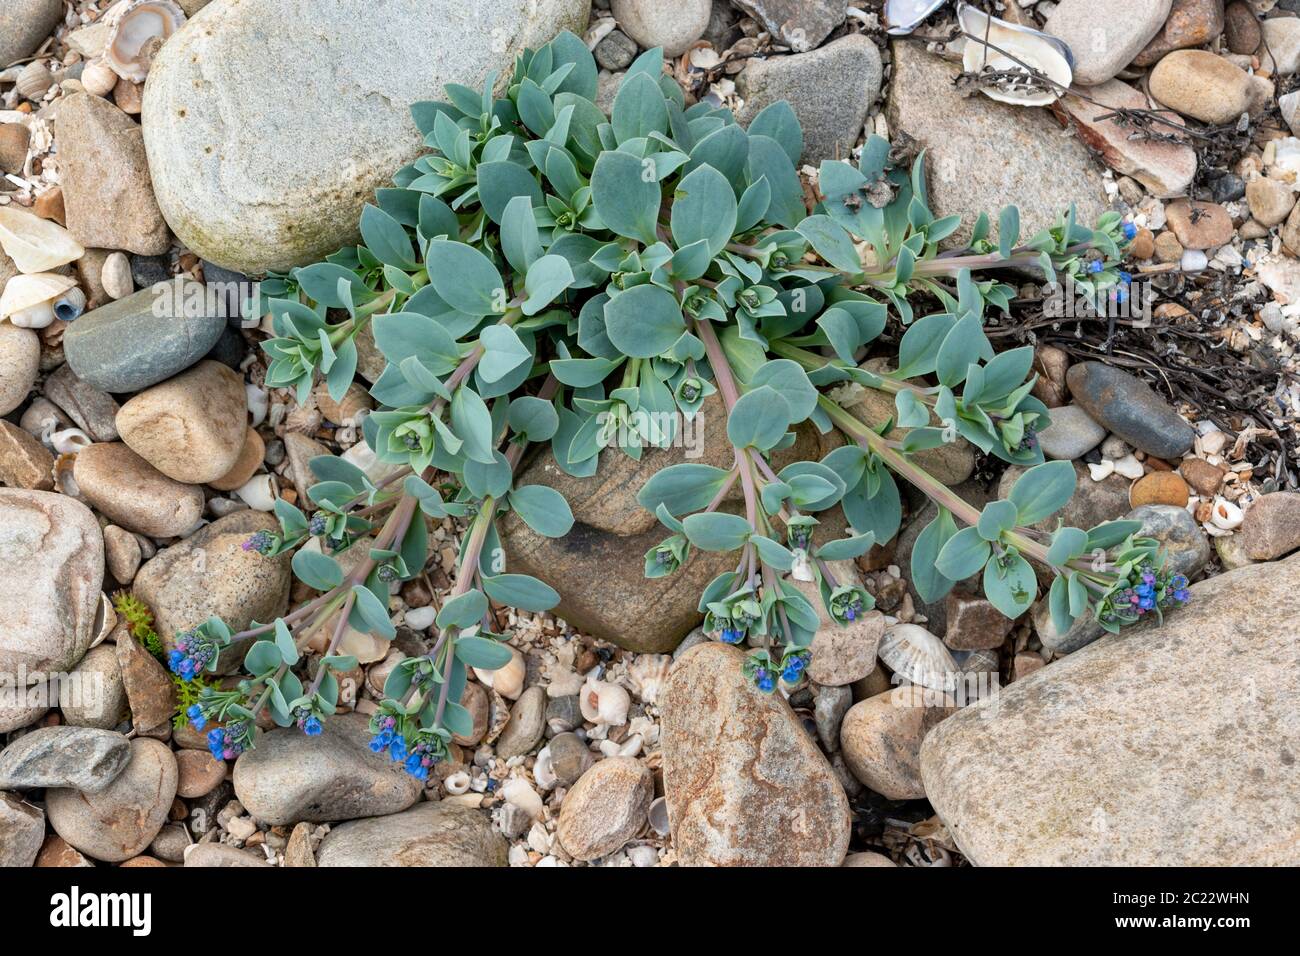 OYSTERPLANT Mertensia maritima  A  BLUE GREEN PLANT AND STEMS WITH BRIGHT BLUE FLOWERS ON A SEASHELL AND ROCK COVERED BEACH THE MORAY COAST SCOTLAND Stock Photo